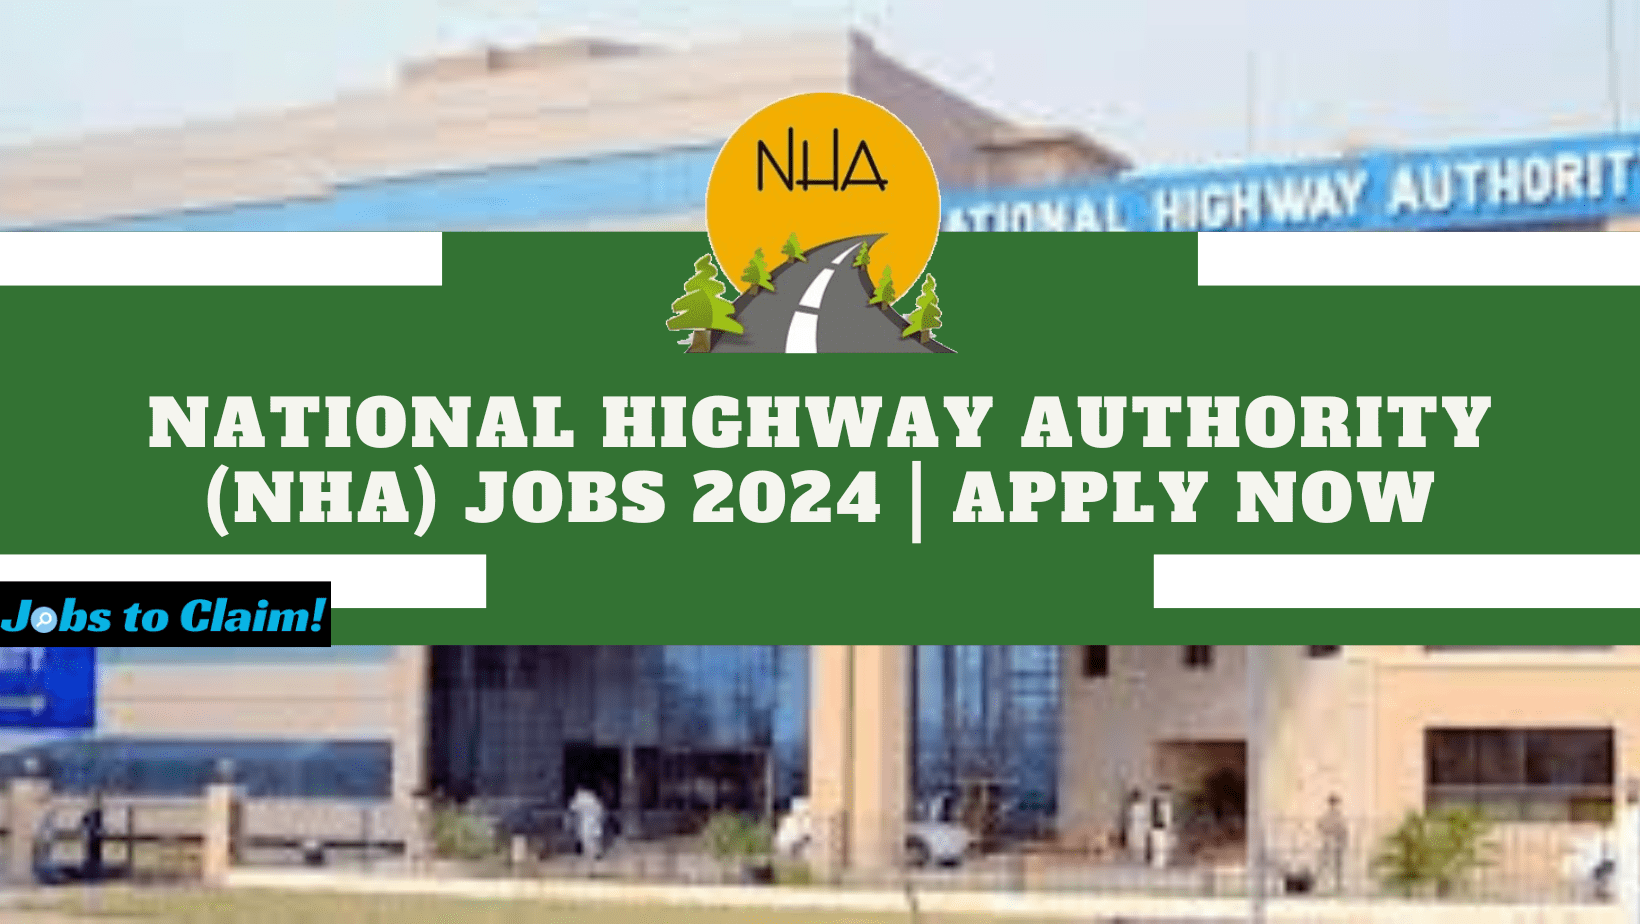 National Highway Authority (NHA) Jobs 2024 | Apply Now